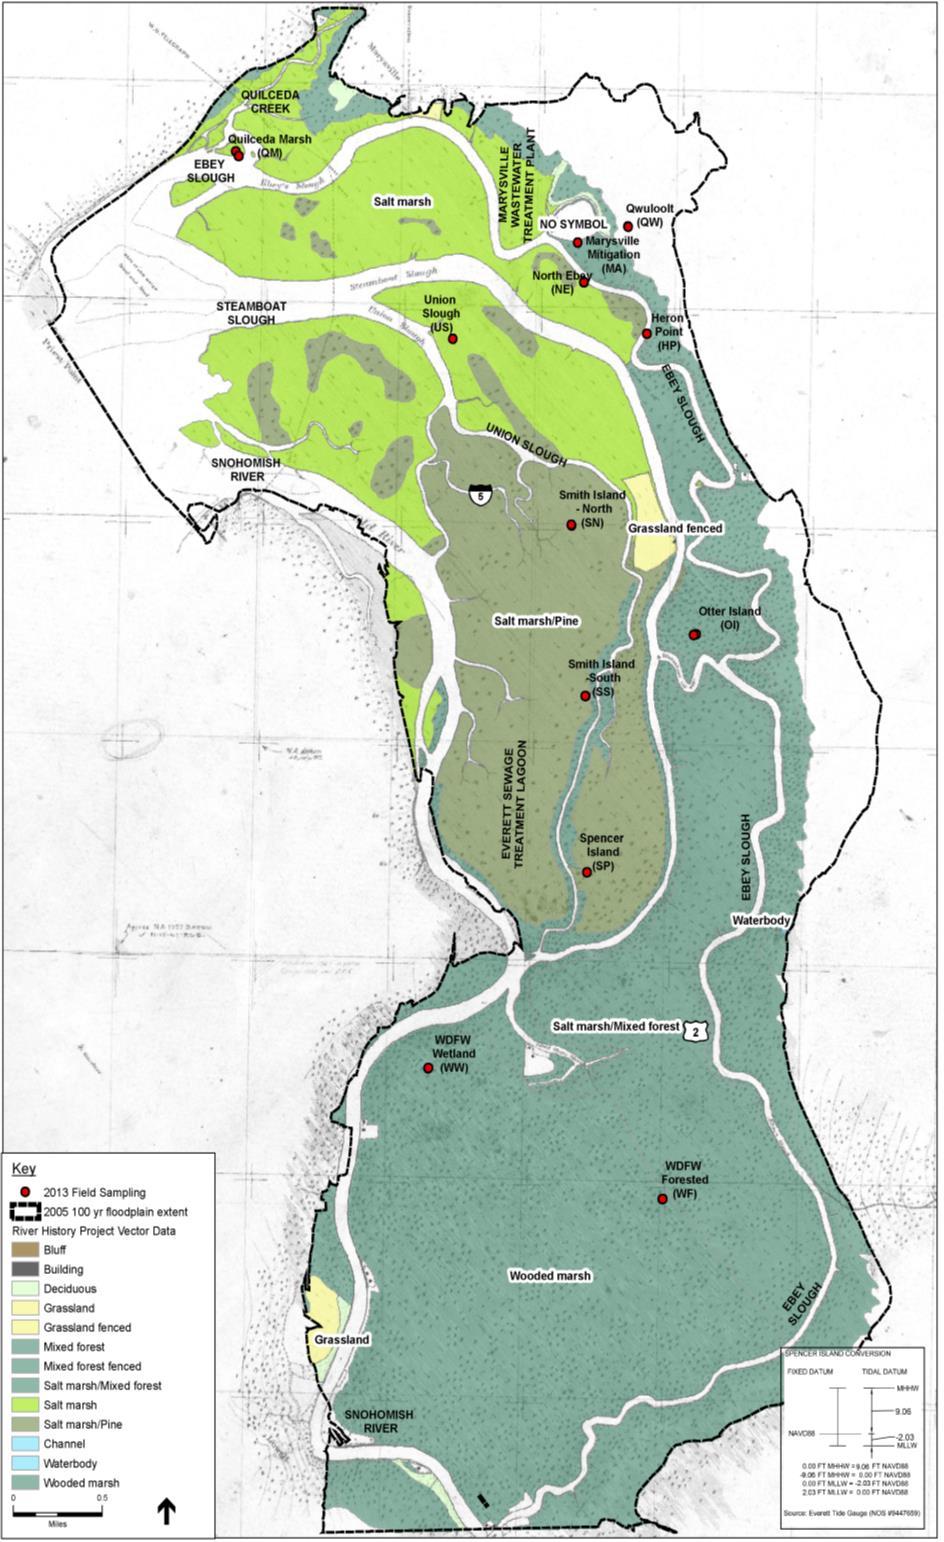 Snohomish Estuary (draft data) 4000 ha original marsh, 600ha remaining. Mostly converted to agriculture and abandoned agr (wet soils). Subsided by c.2m 4.